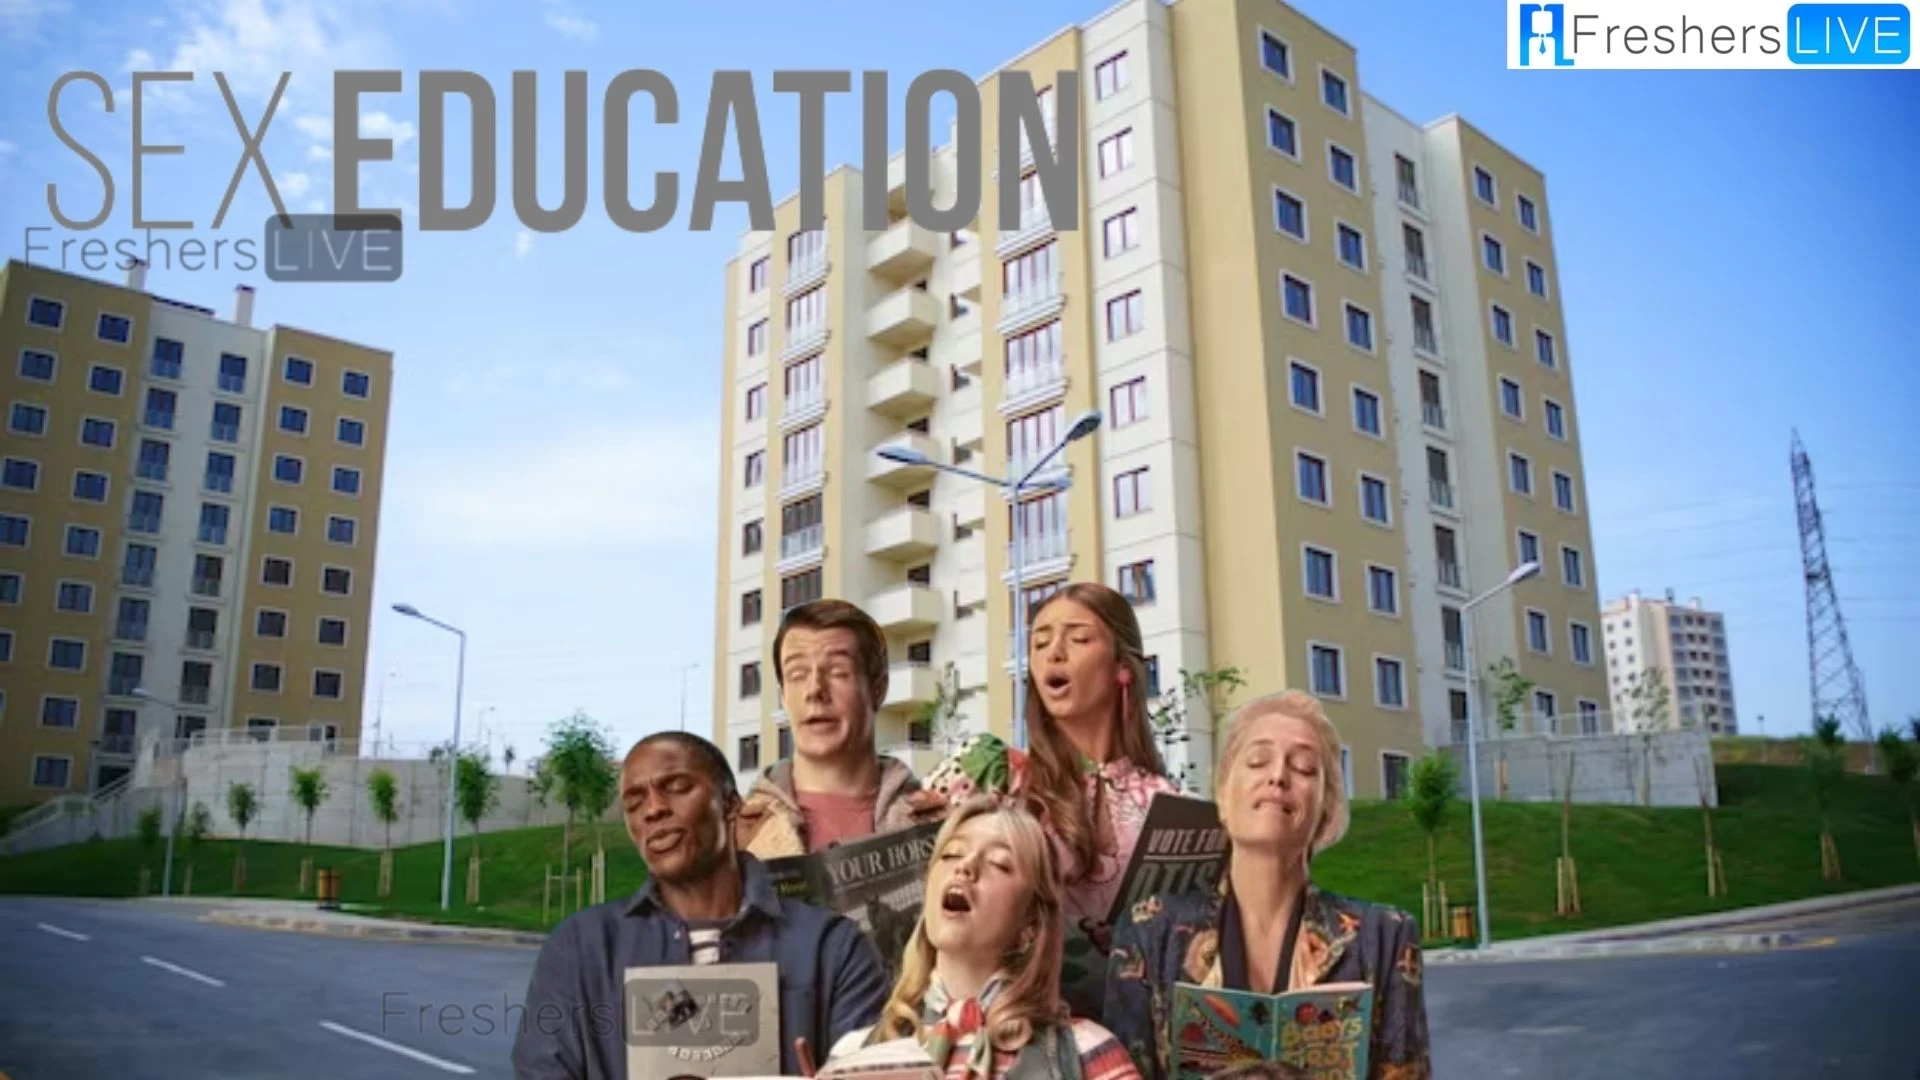 Sex Education Season 4 Episode 5 Ending Explained, Release Date, Plot, Review, Where to Watch, and More